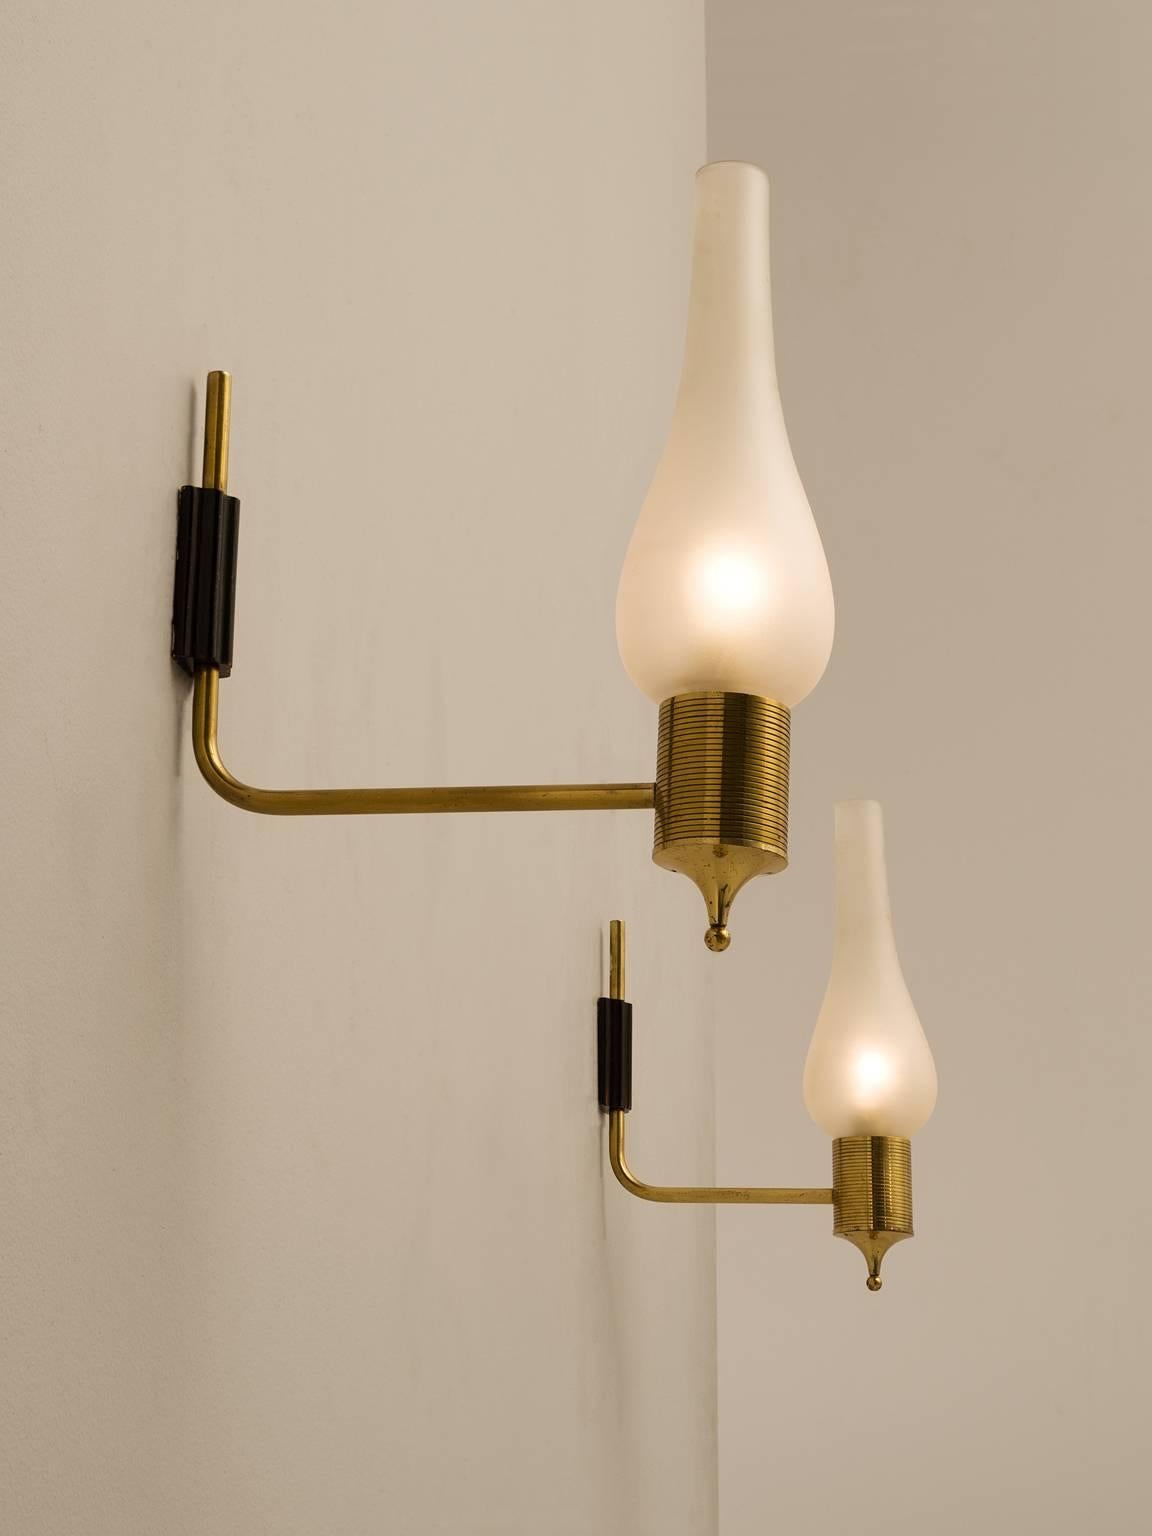 Pair of wall lights, in brass, metal and glass, for Maison Arlus, France 1950s. 

Elegant pair of wall lights. These lights remind of classical candle stick holders. A brass fixture, nicely decorated under the glass. The frosted glass has an elegant